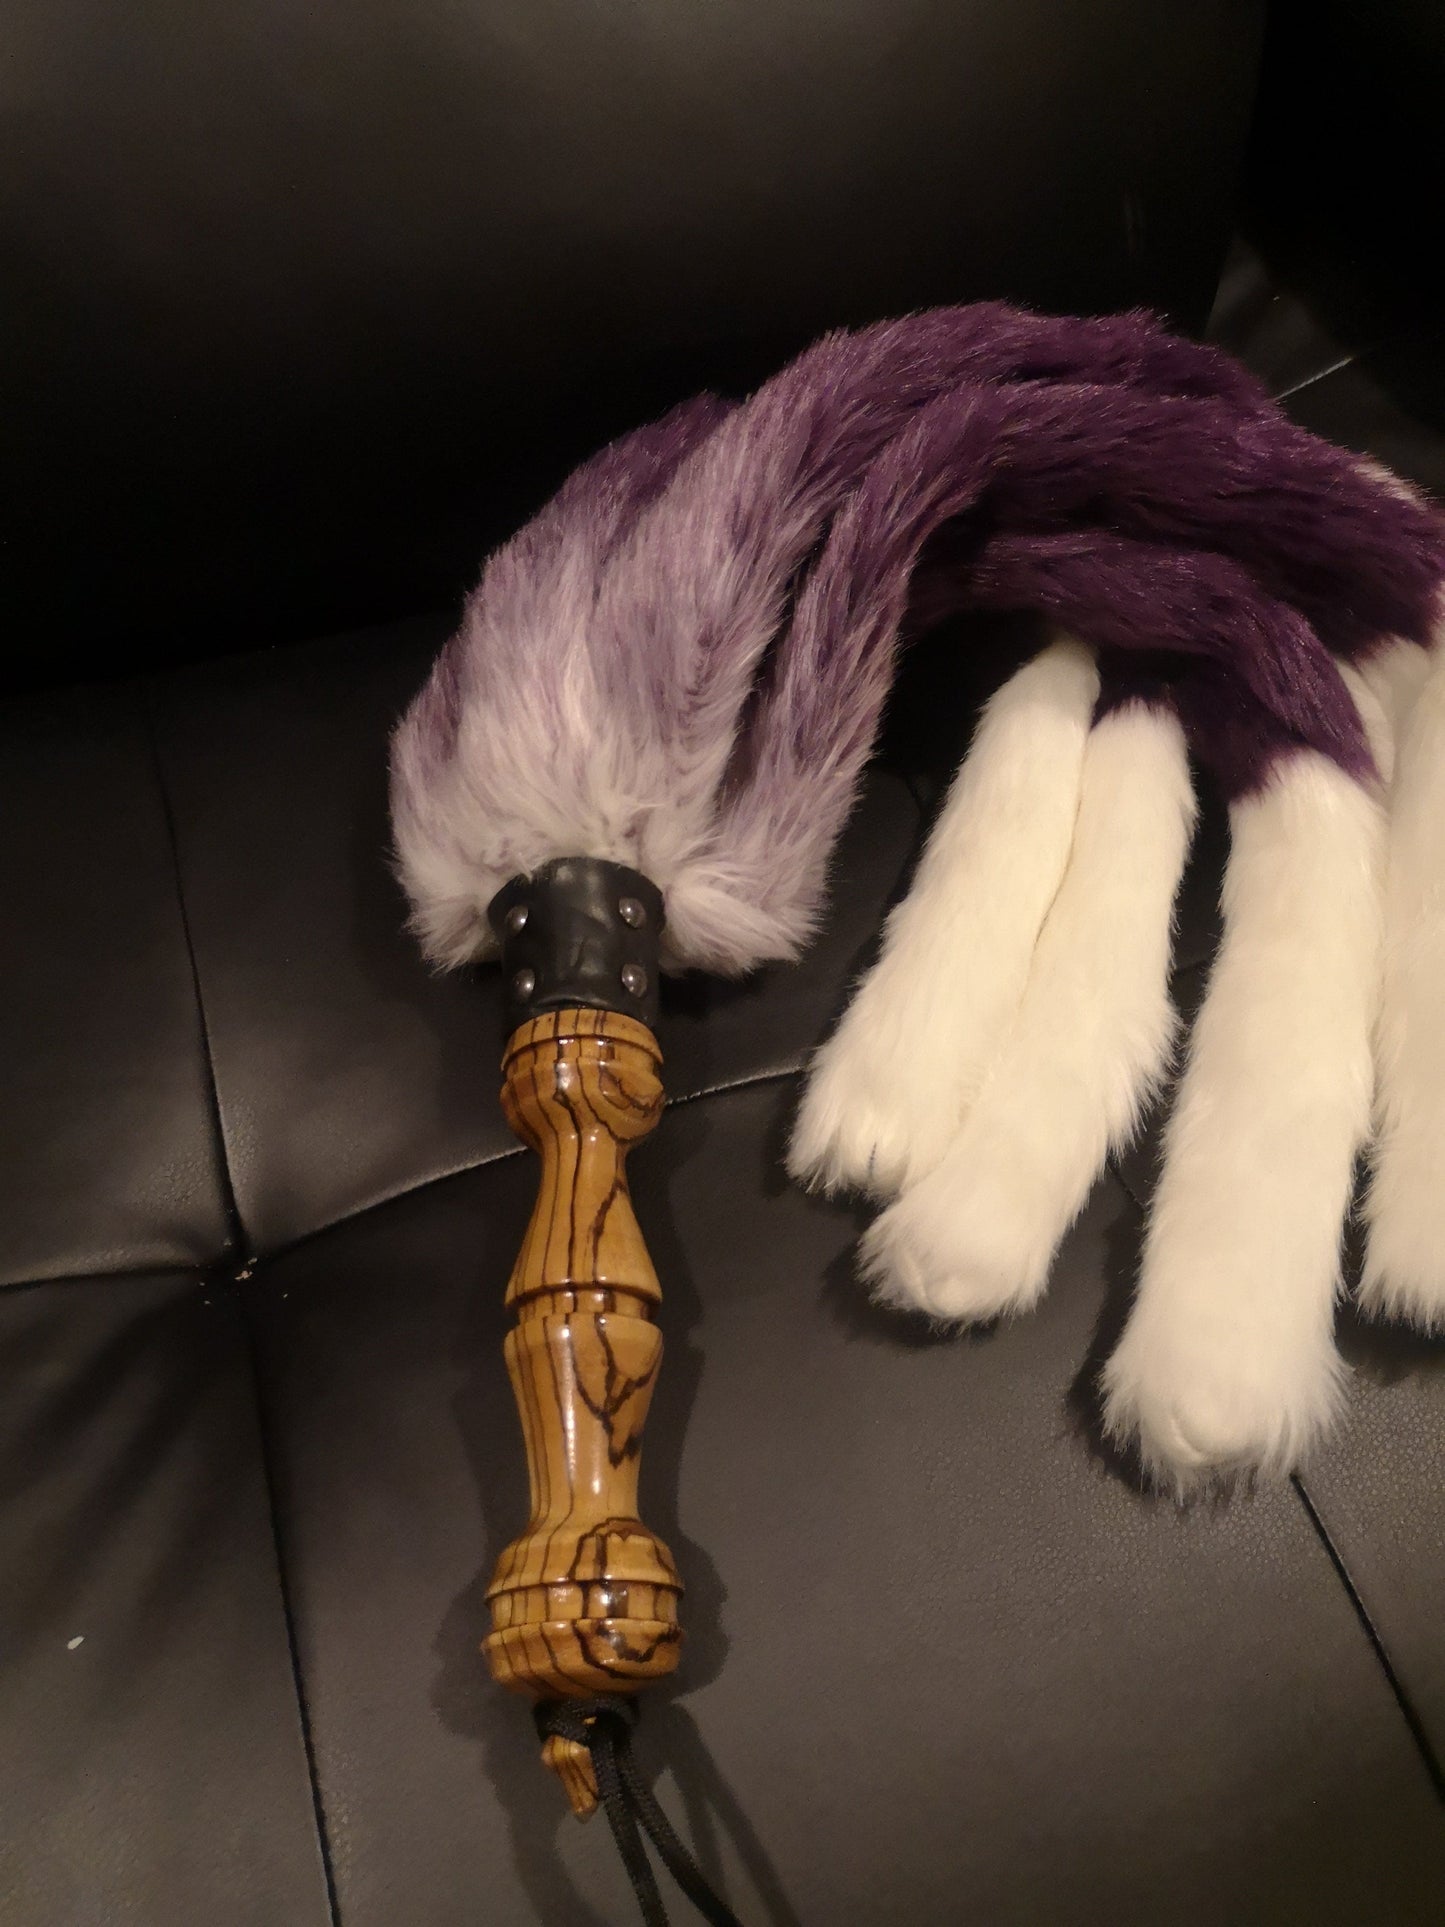 "Purple Panda" weighted fluffy flogger